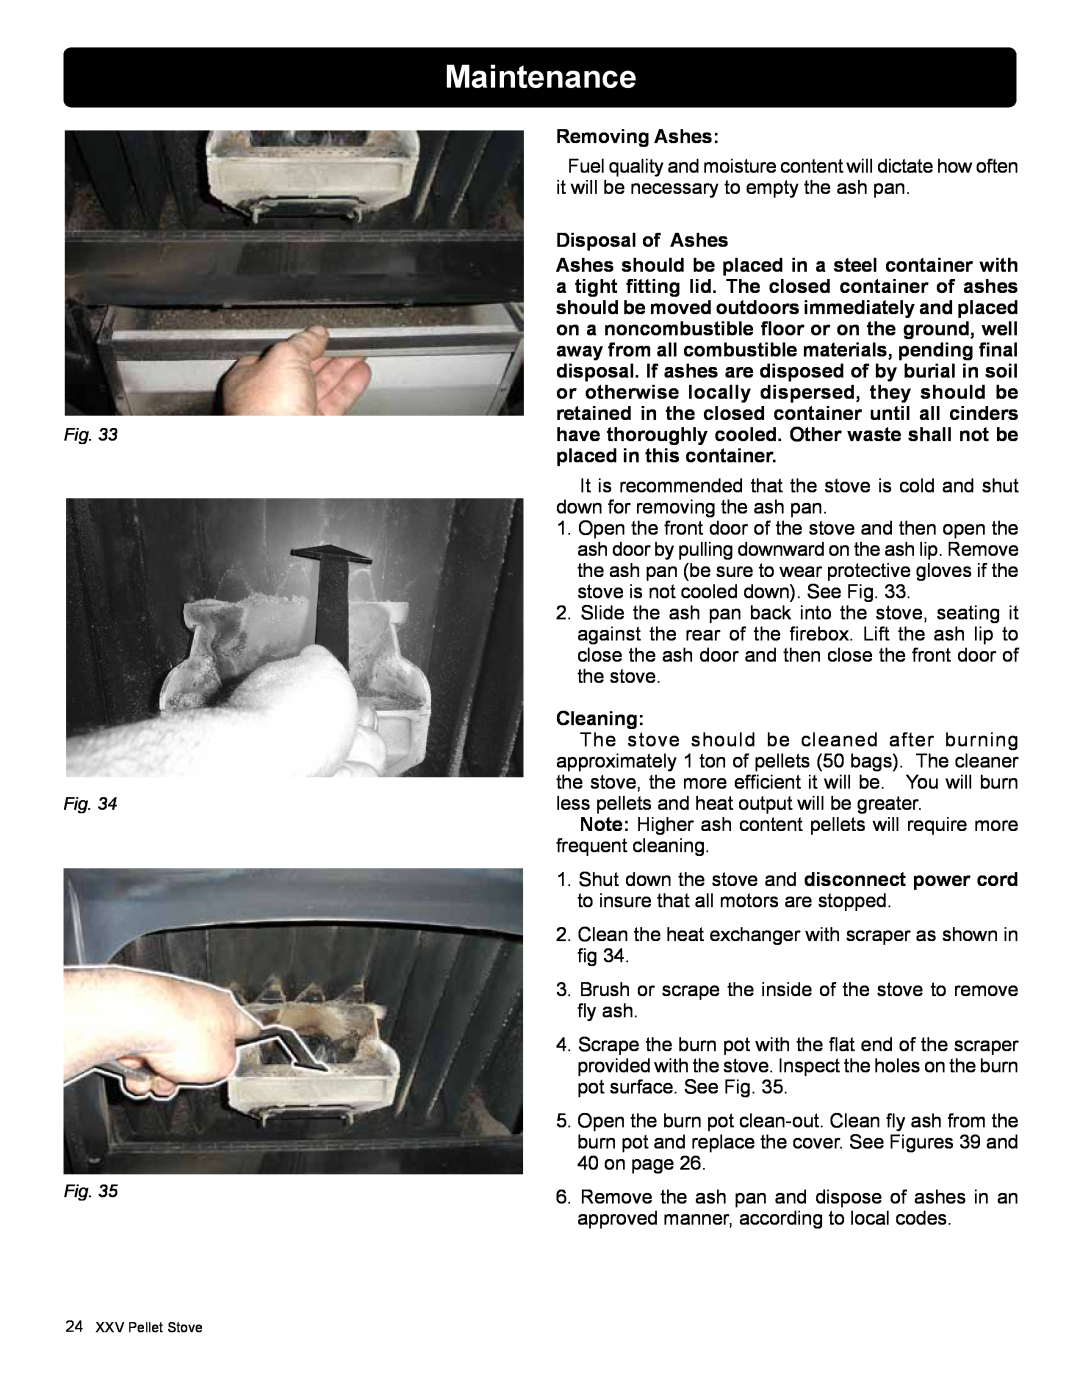 Harman Stove Company R16 manual Maintenance, Removing Ashes, Disposal of Ashes, Cleaning 